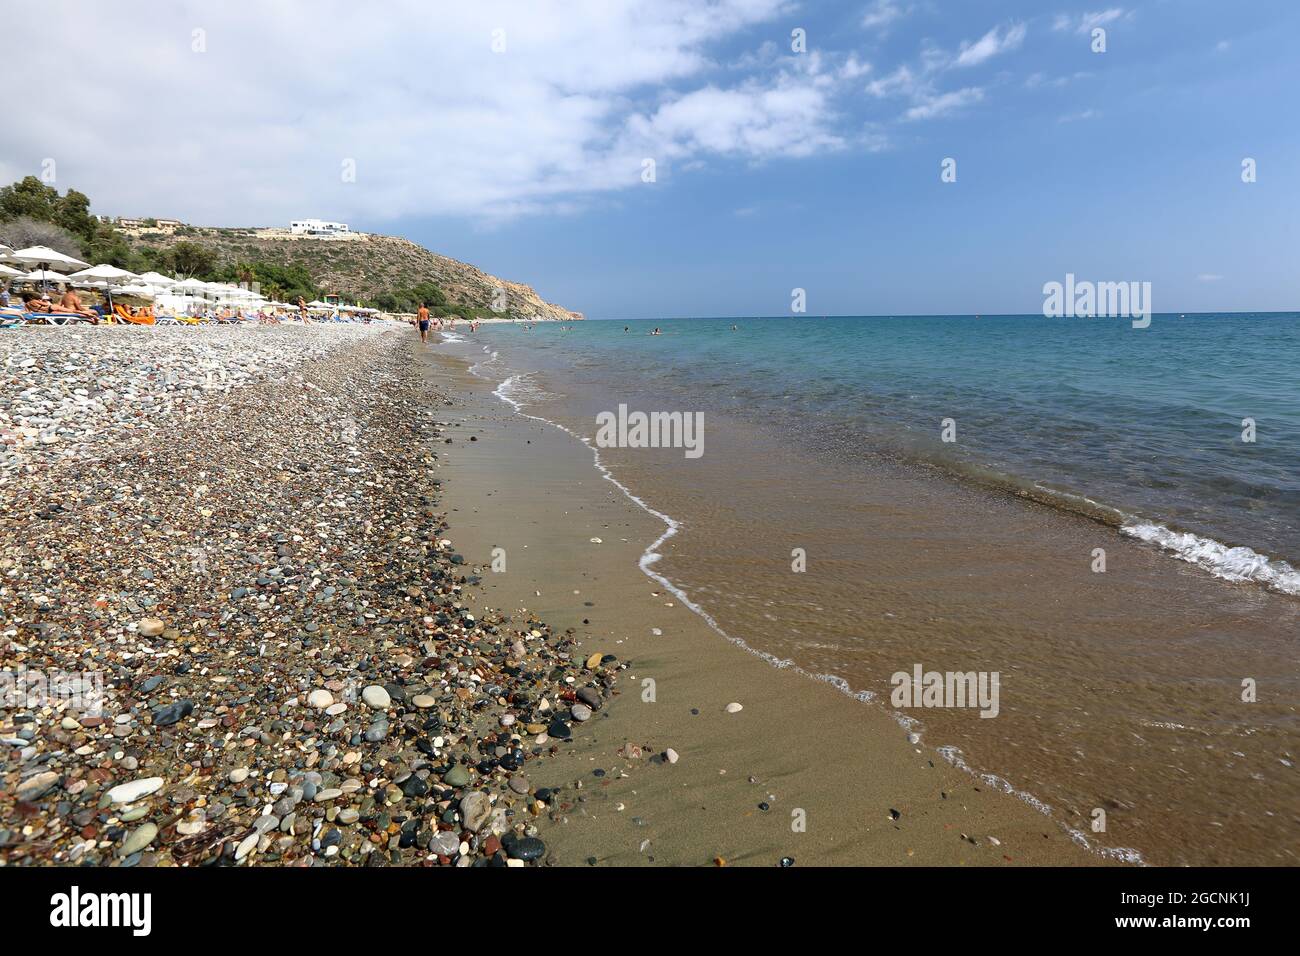 Beautiful beach and Mediterranean sea in Pissouri, Cyprus, relax on the beach, vacation, summer relaxing. Stock Photo